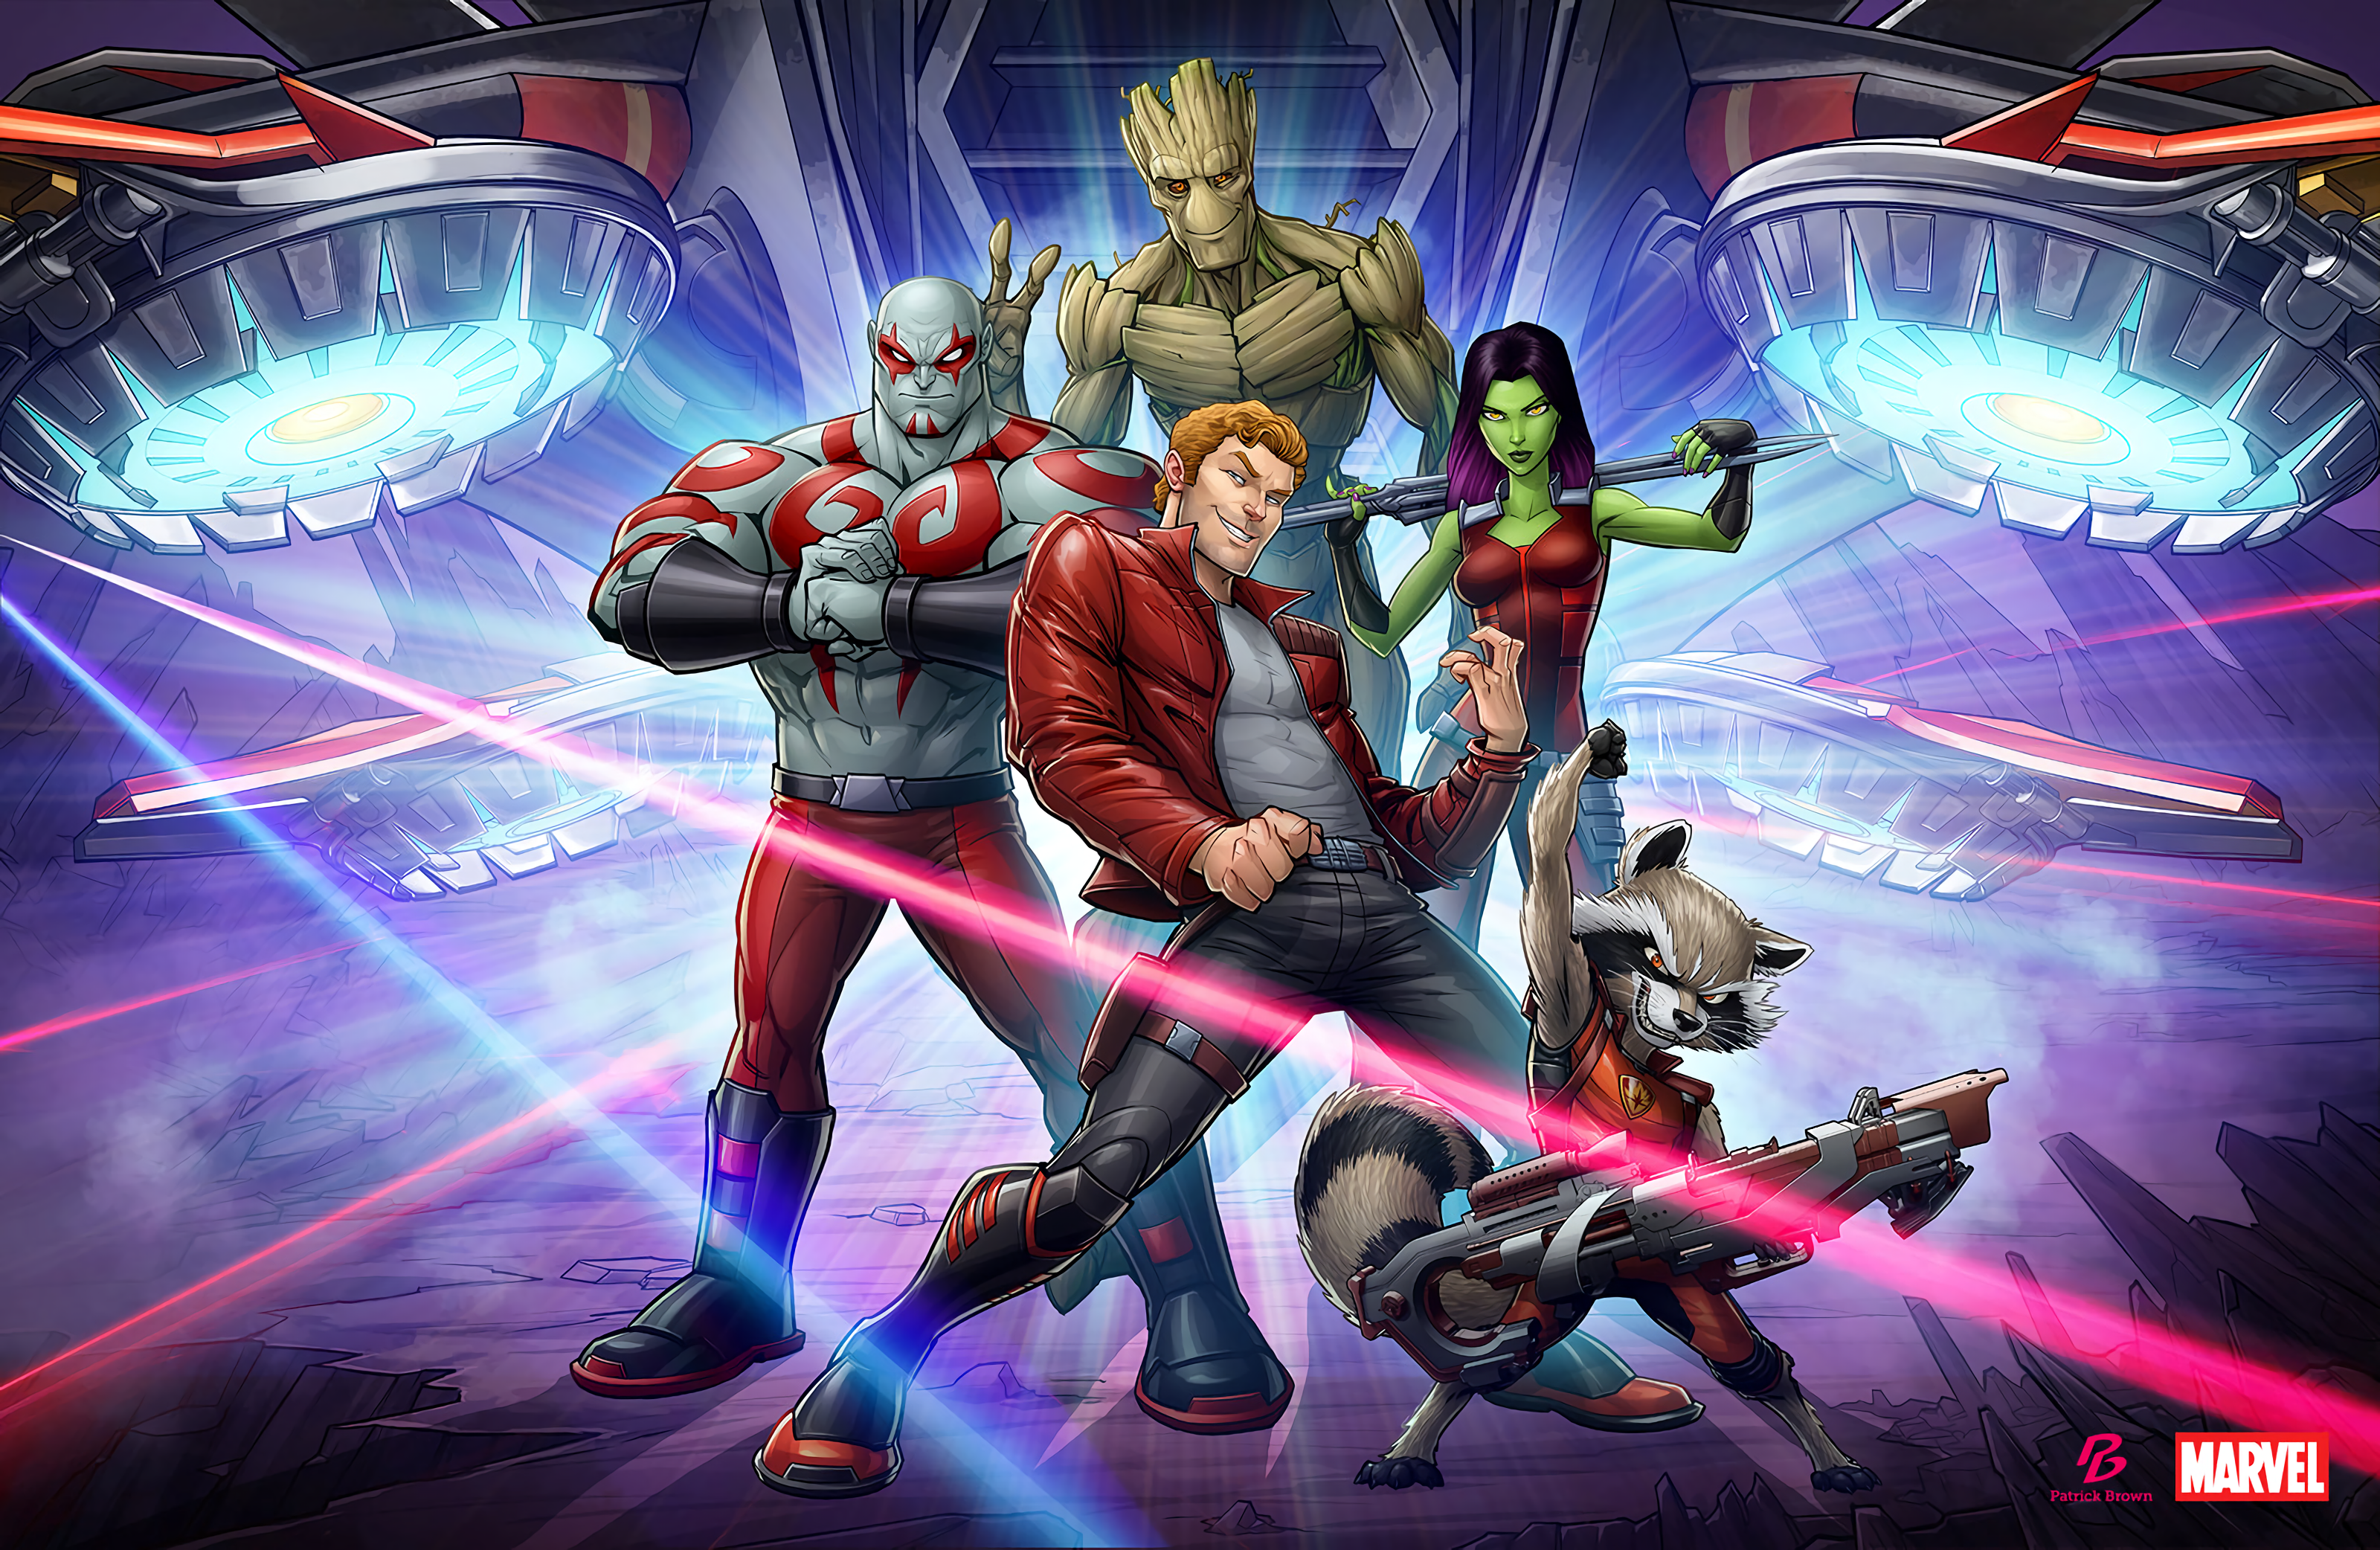 Drax The Destroyer Gamora Groot Guardians Of The Galaxy Marvel Comics Peter Quill Rocket Raccoon Sta 3200x2084